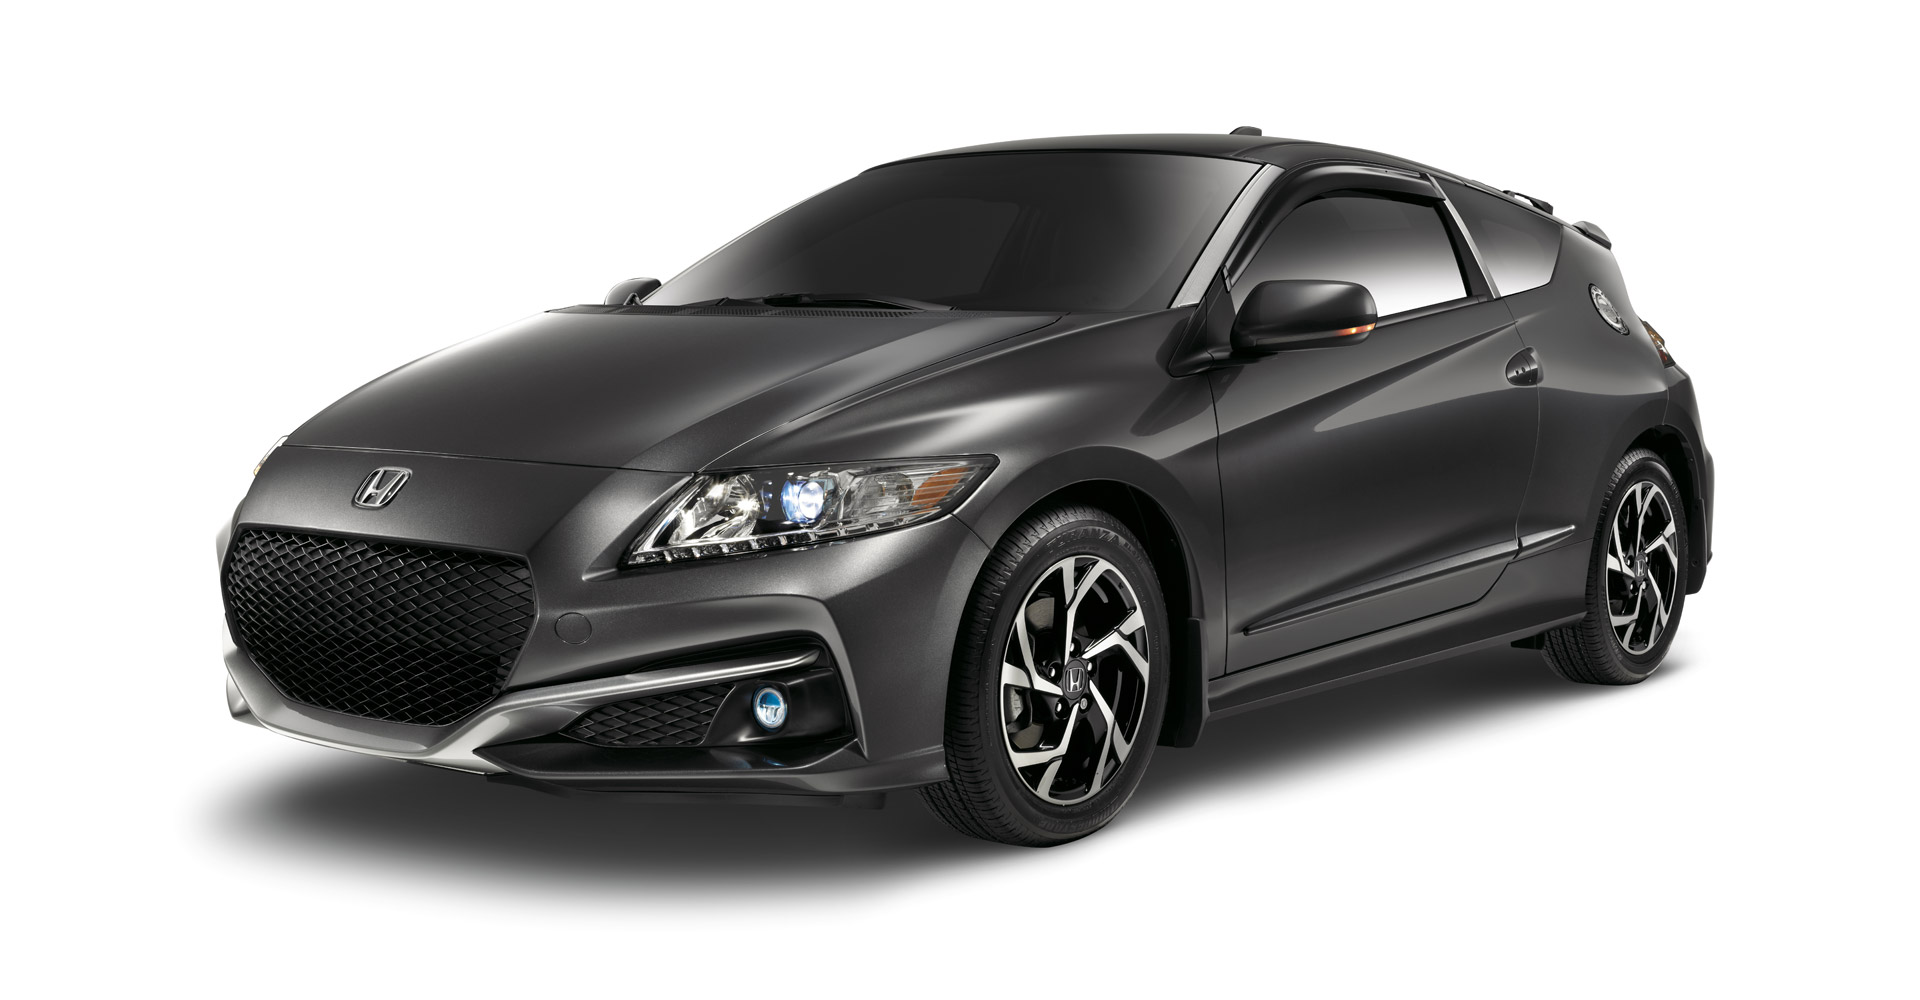 2016 Honda Cr-Z oem parts and accessories on sale